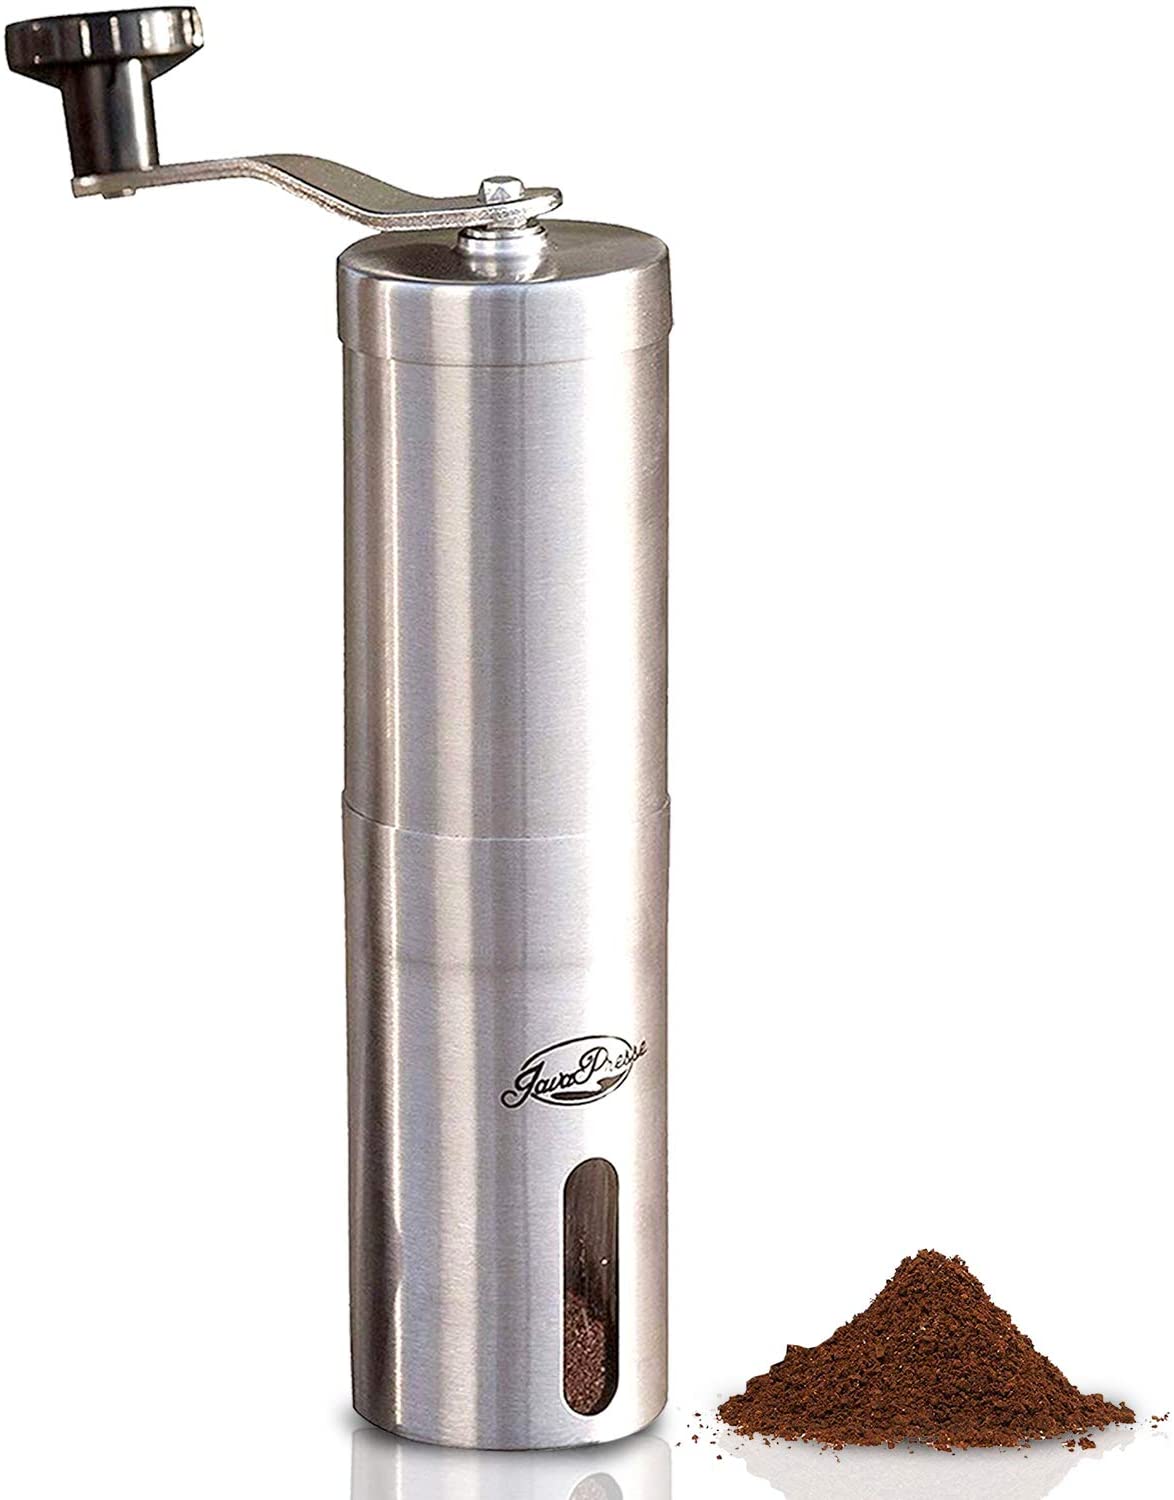 Office and Travel SULIVES Stainless Steel Manual Coffee Grinder with Adjustable Ceramic Conical Burr Ideal for Home 